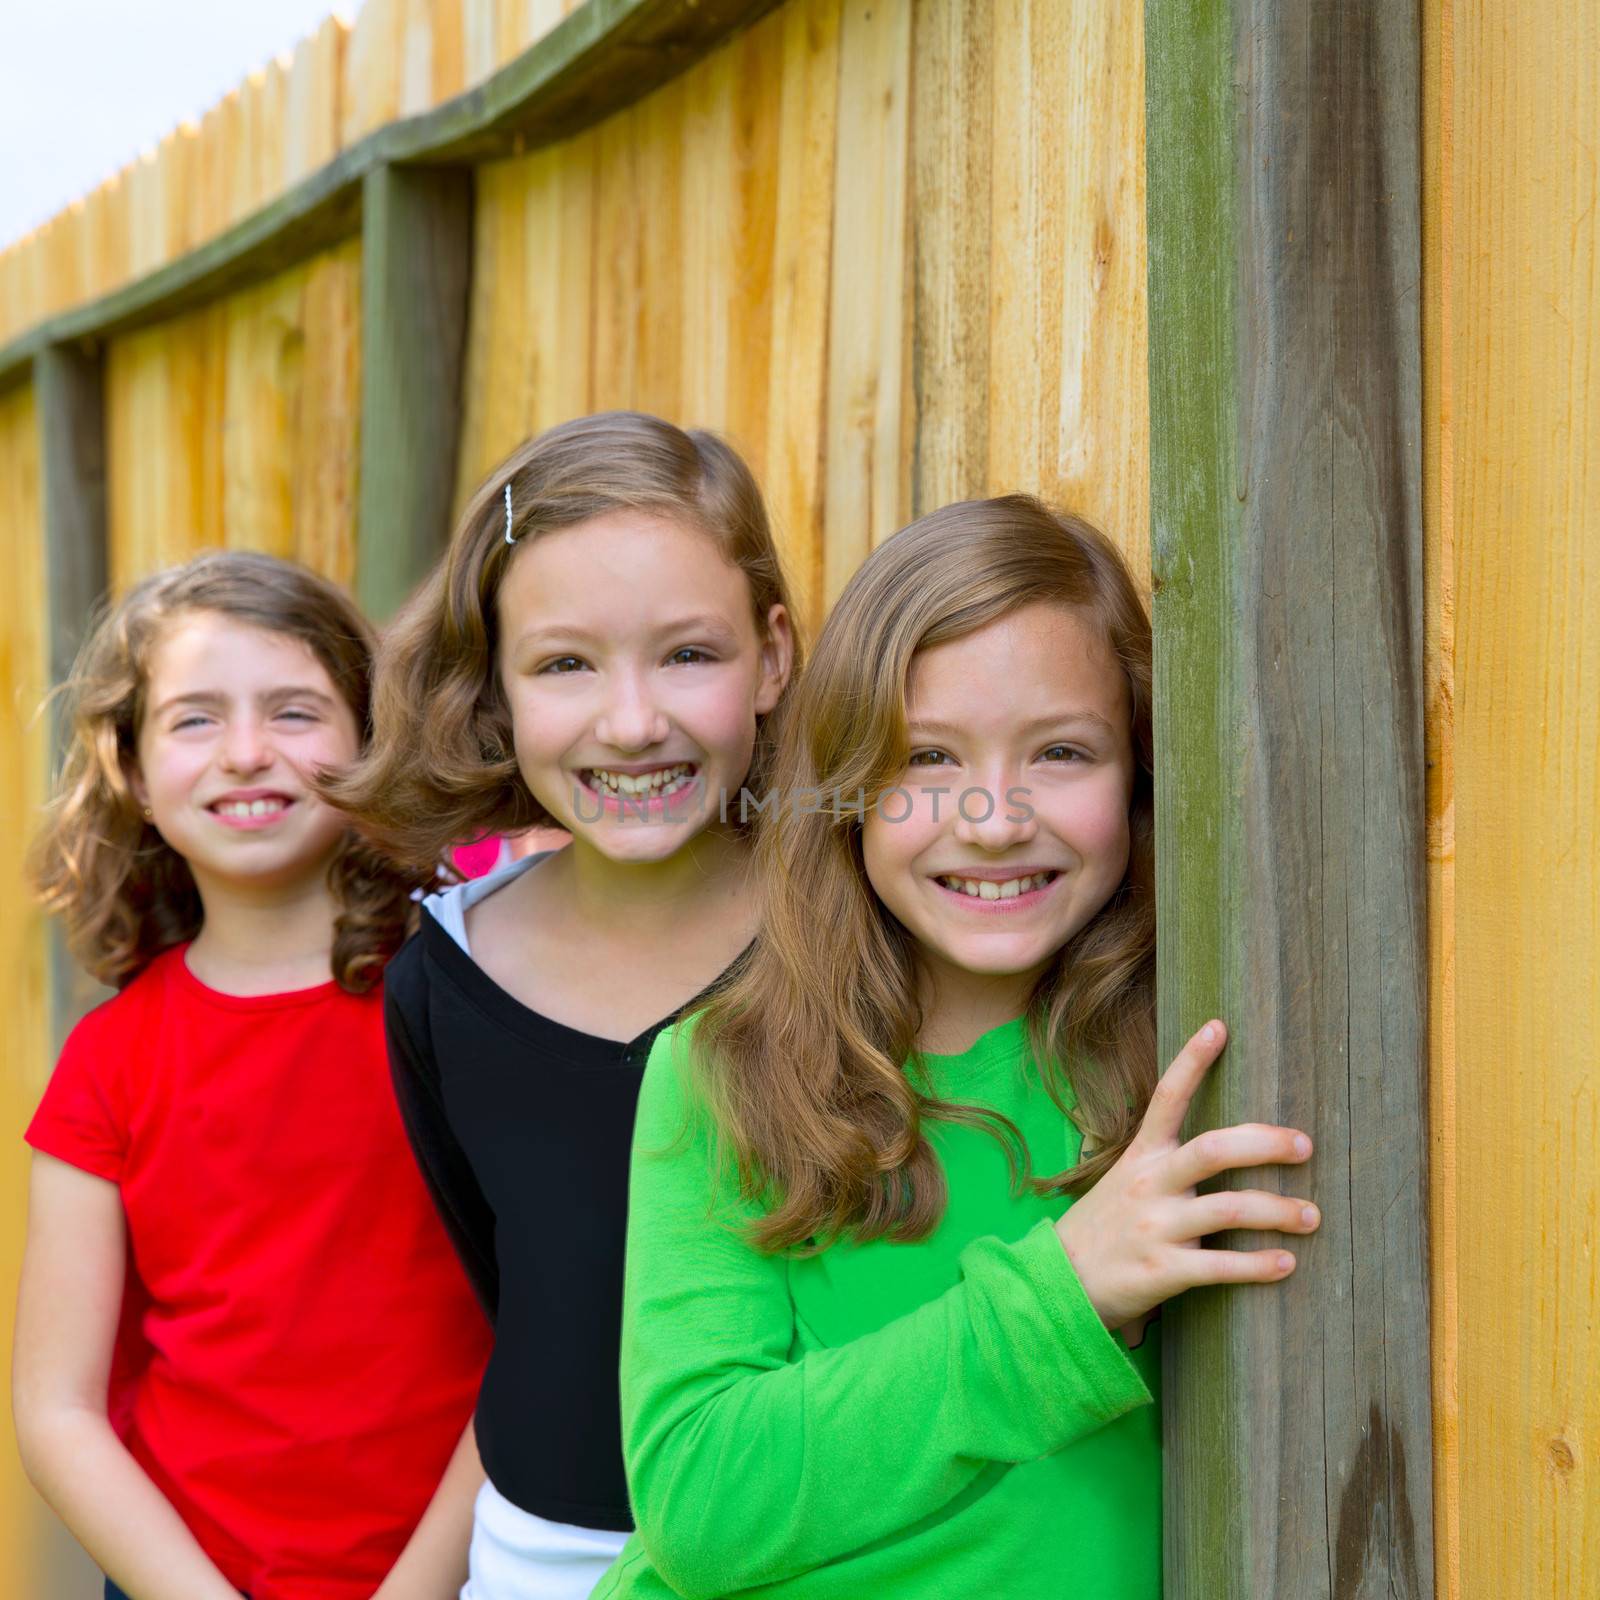 Grils group in a row smiling in a wooden fence by lunamarina